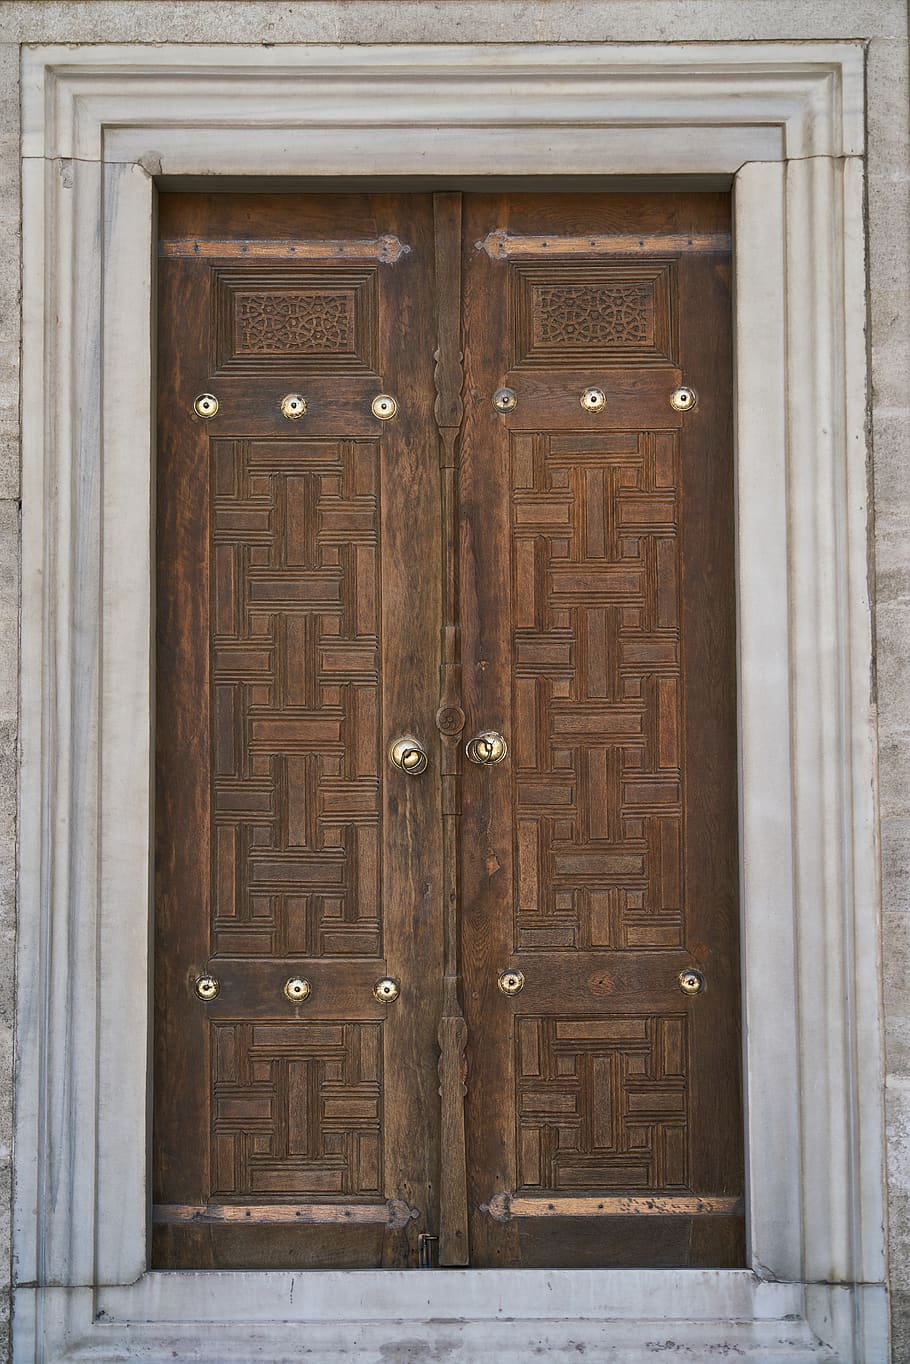 door, wood, old, introduction, architecture, building, entrance, closed, wood - material, protection